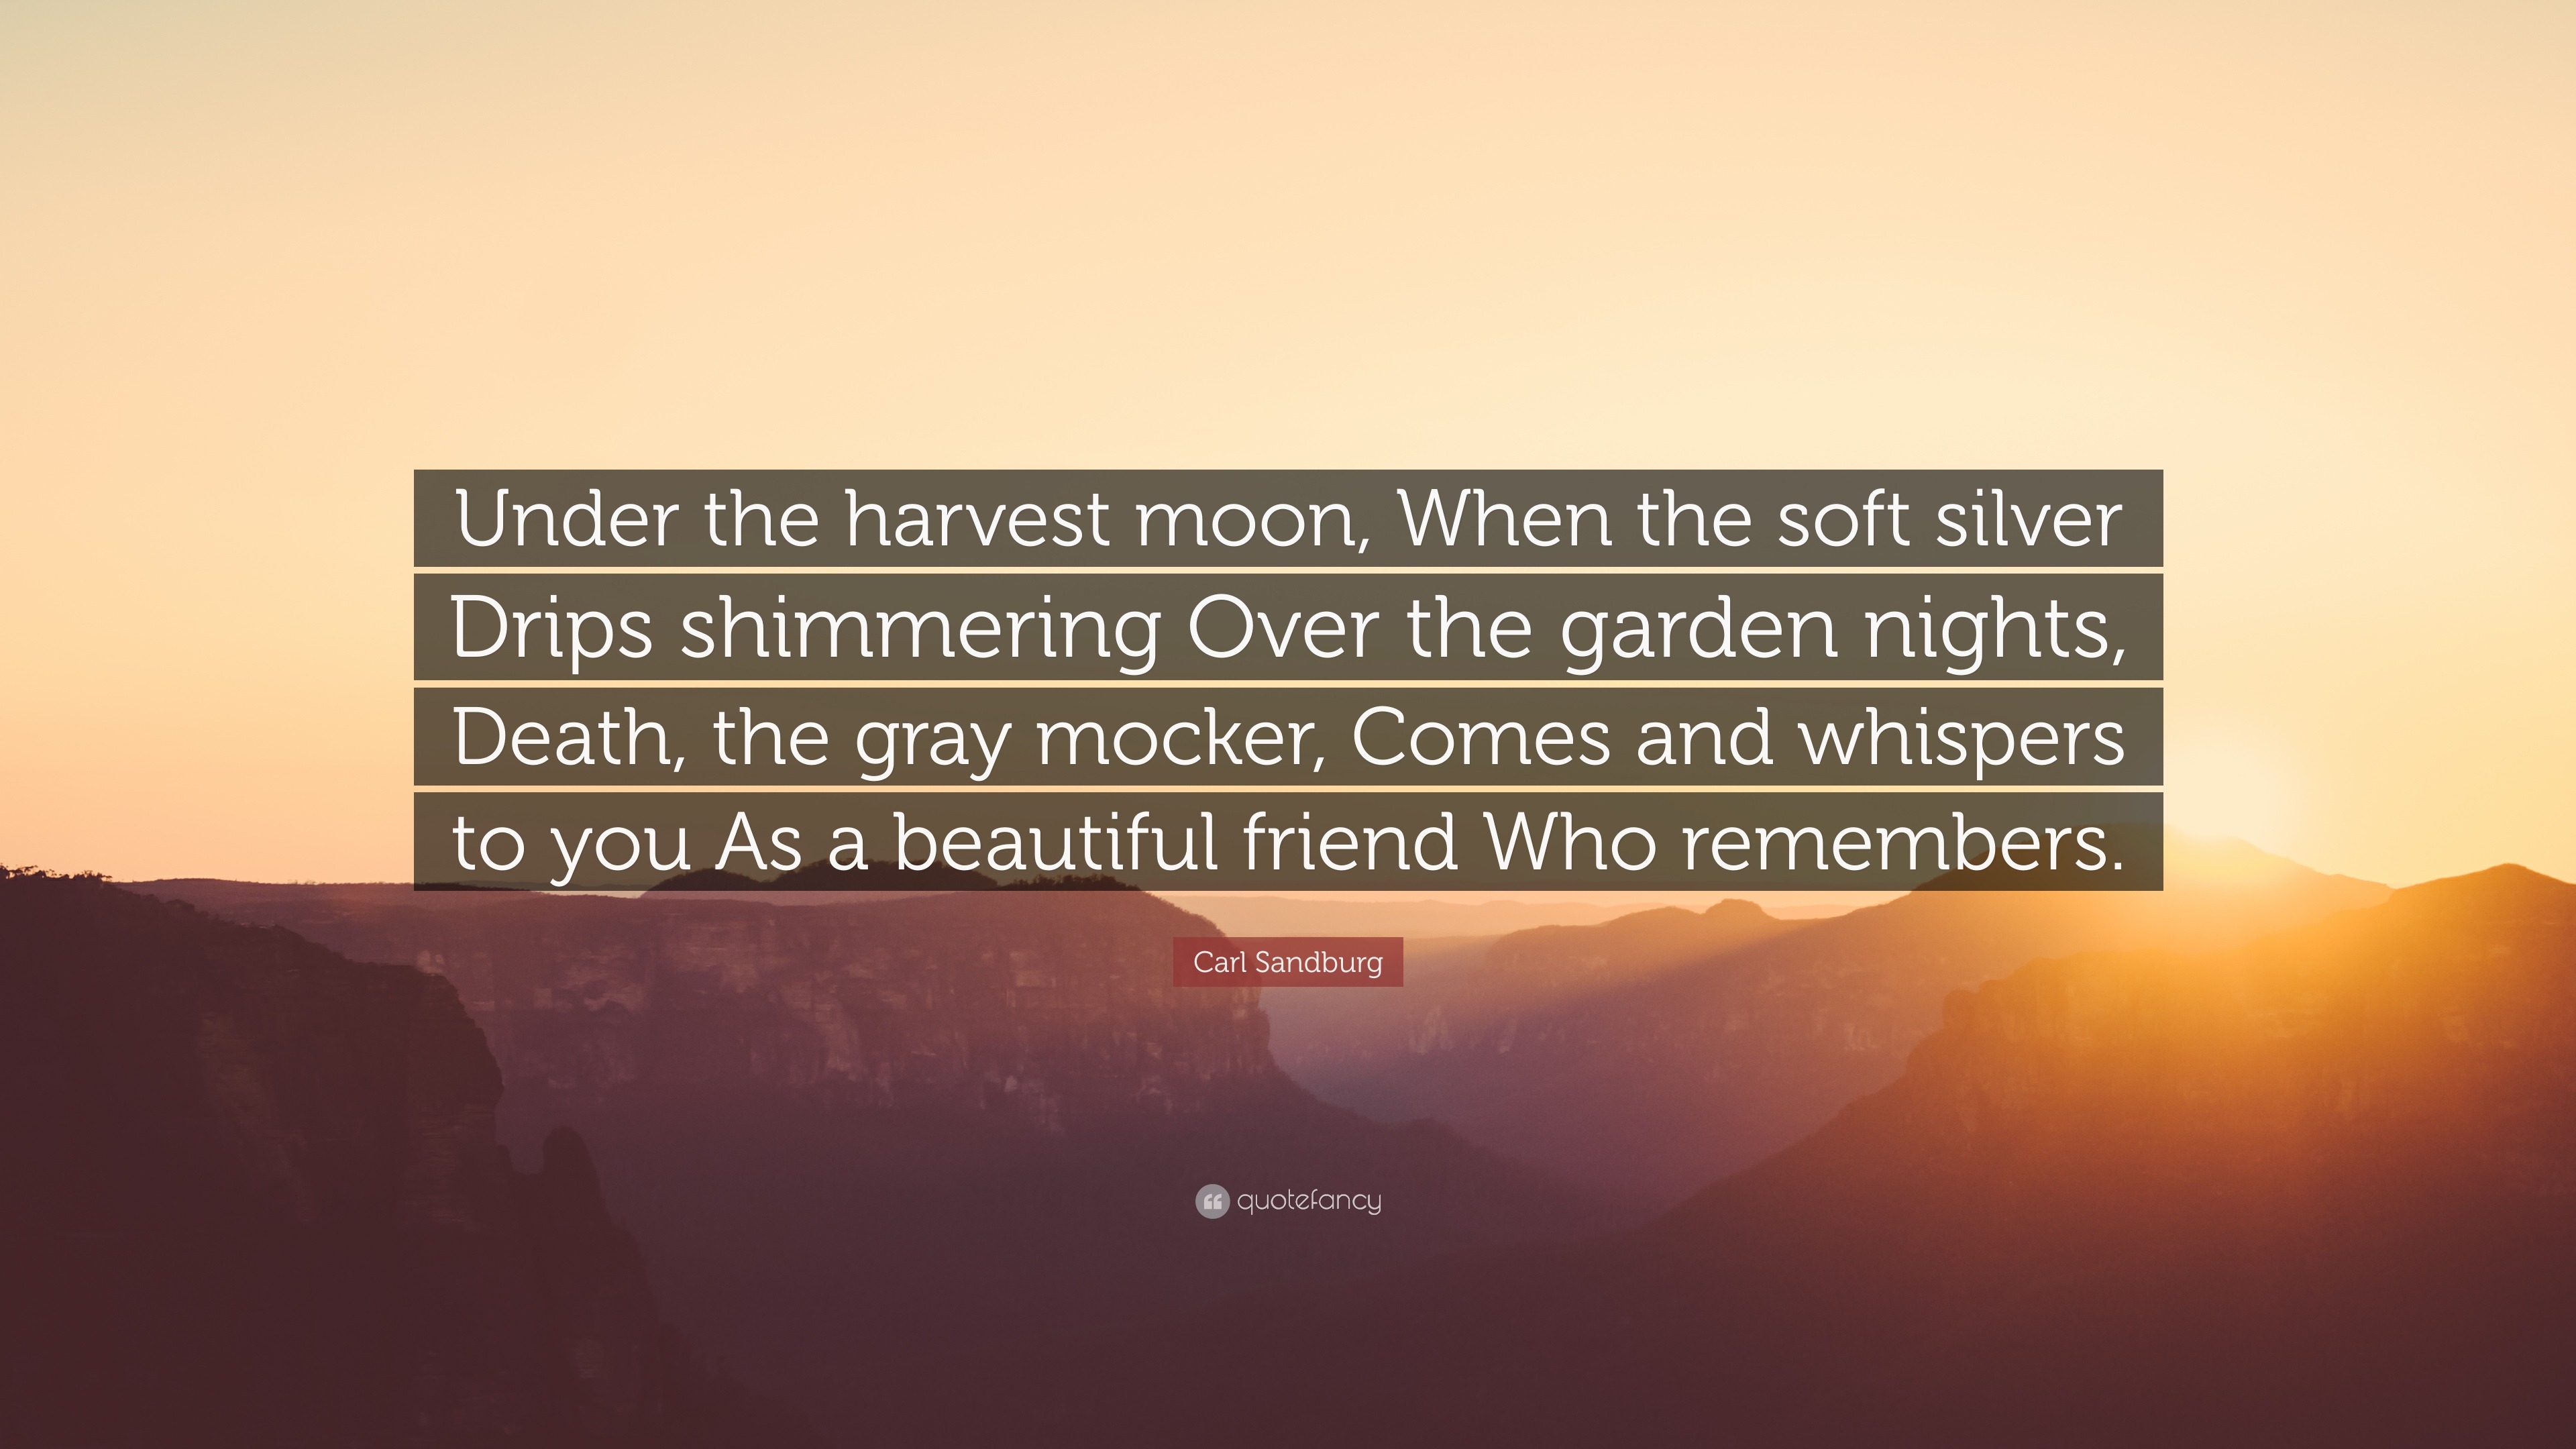 Carl Sandburg Quote Under The Harvest Moon When The Soft Silver Drips Shimmering Over The Garden Nights Death The Gray Mocker Comes And